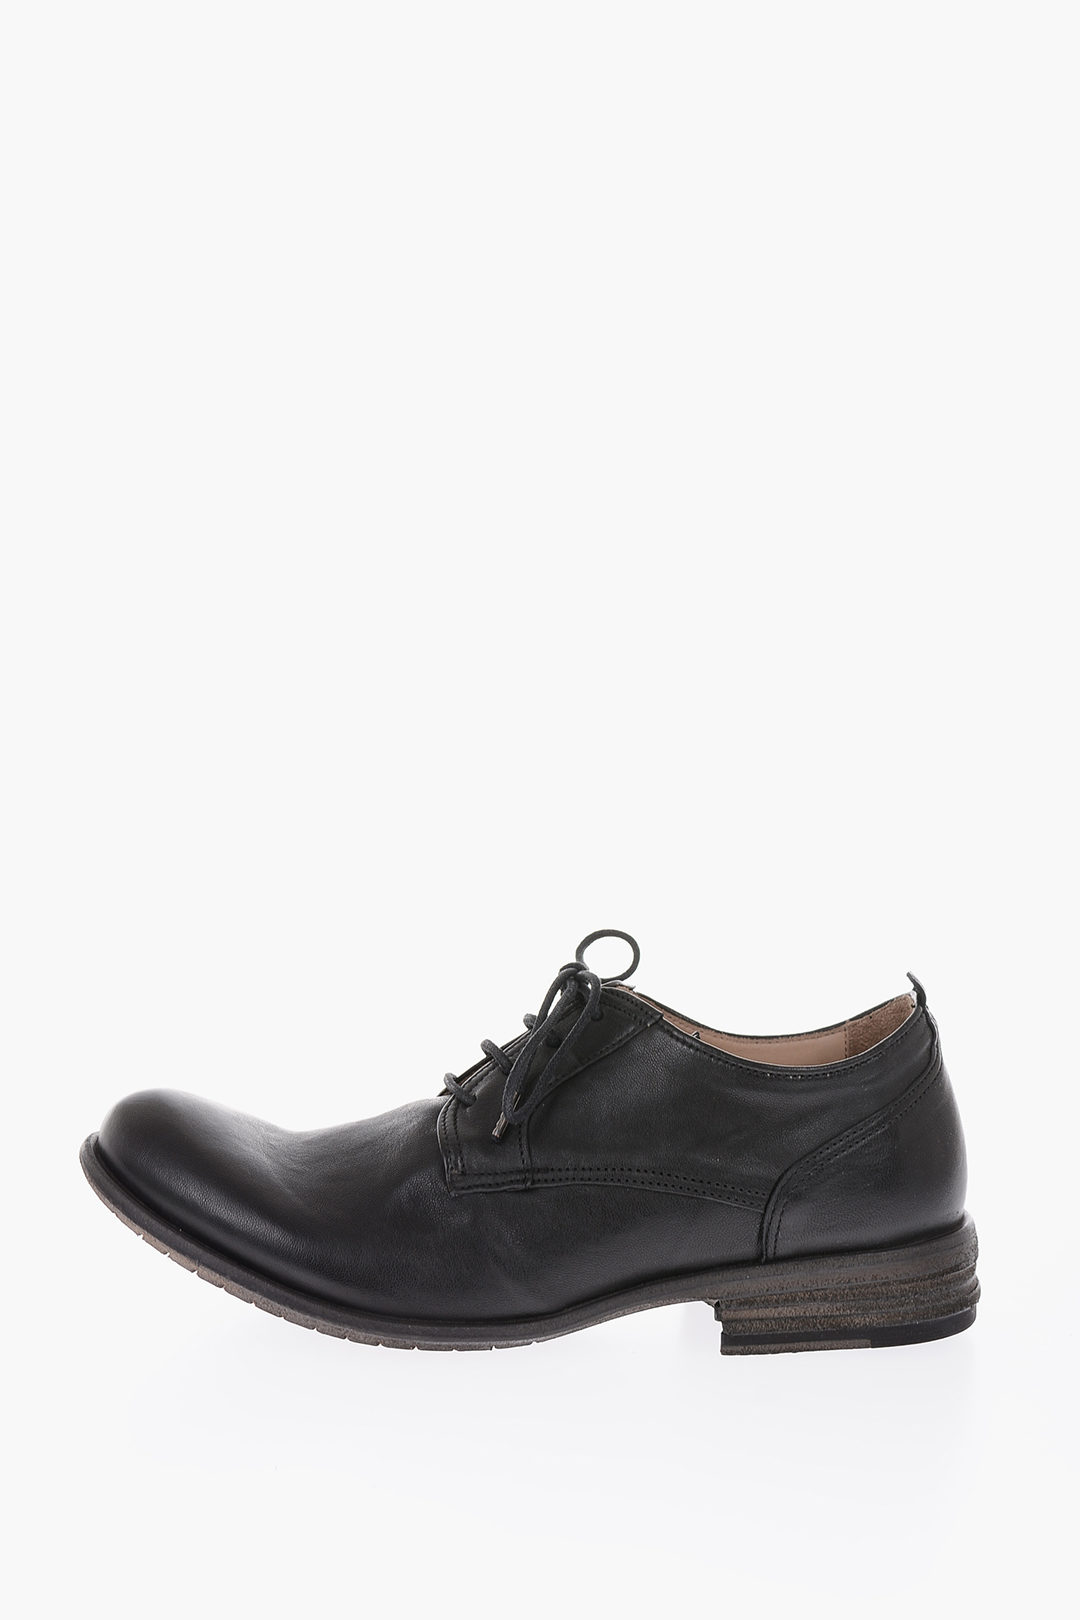 Fiorentini+Baker leather Derby shoes men - Glamood Outlet